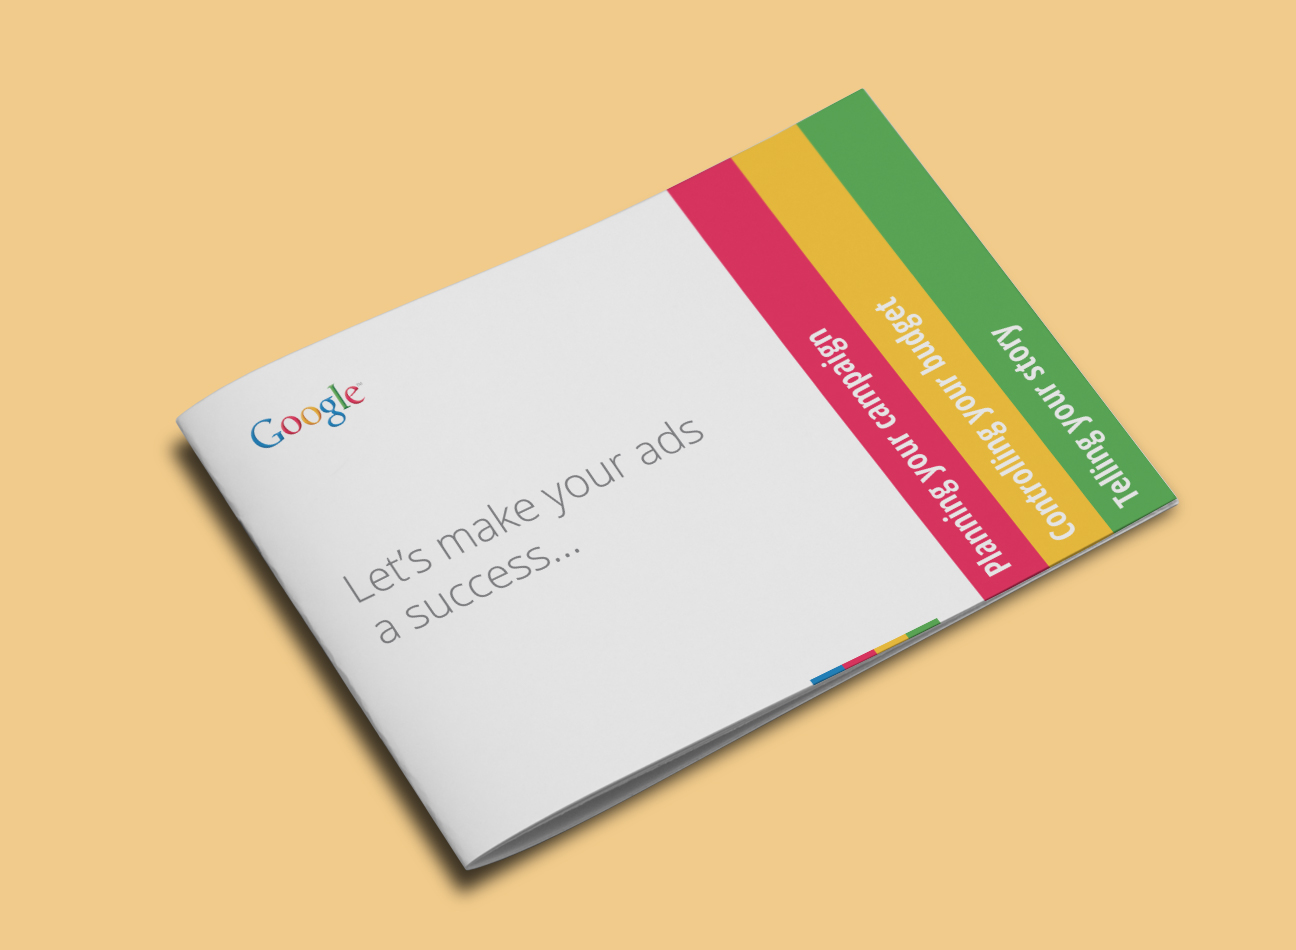 Direct mail leaflet for Google with coloured tabs on a yellow background